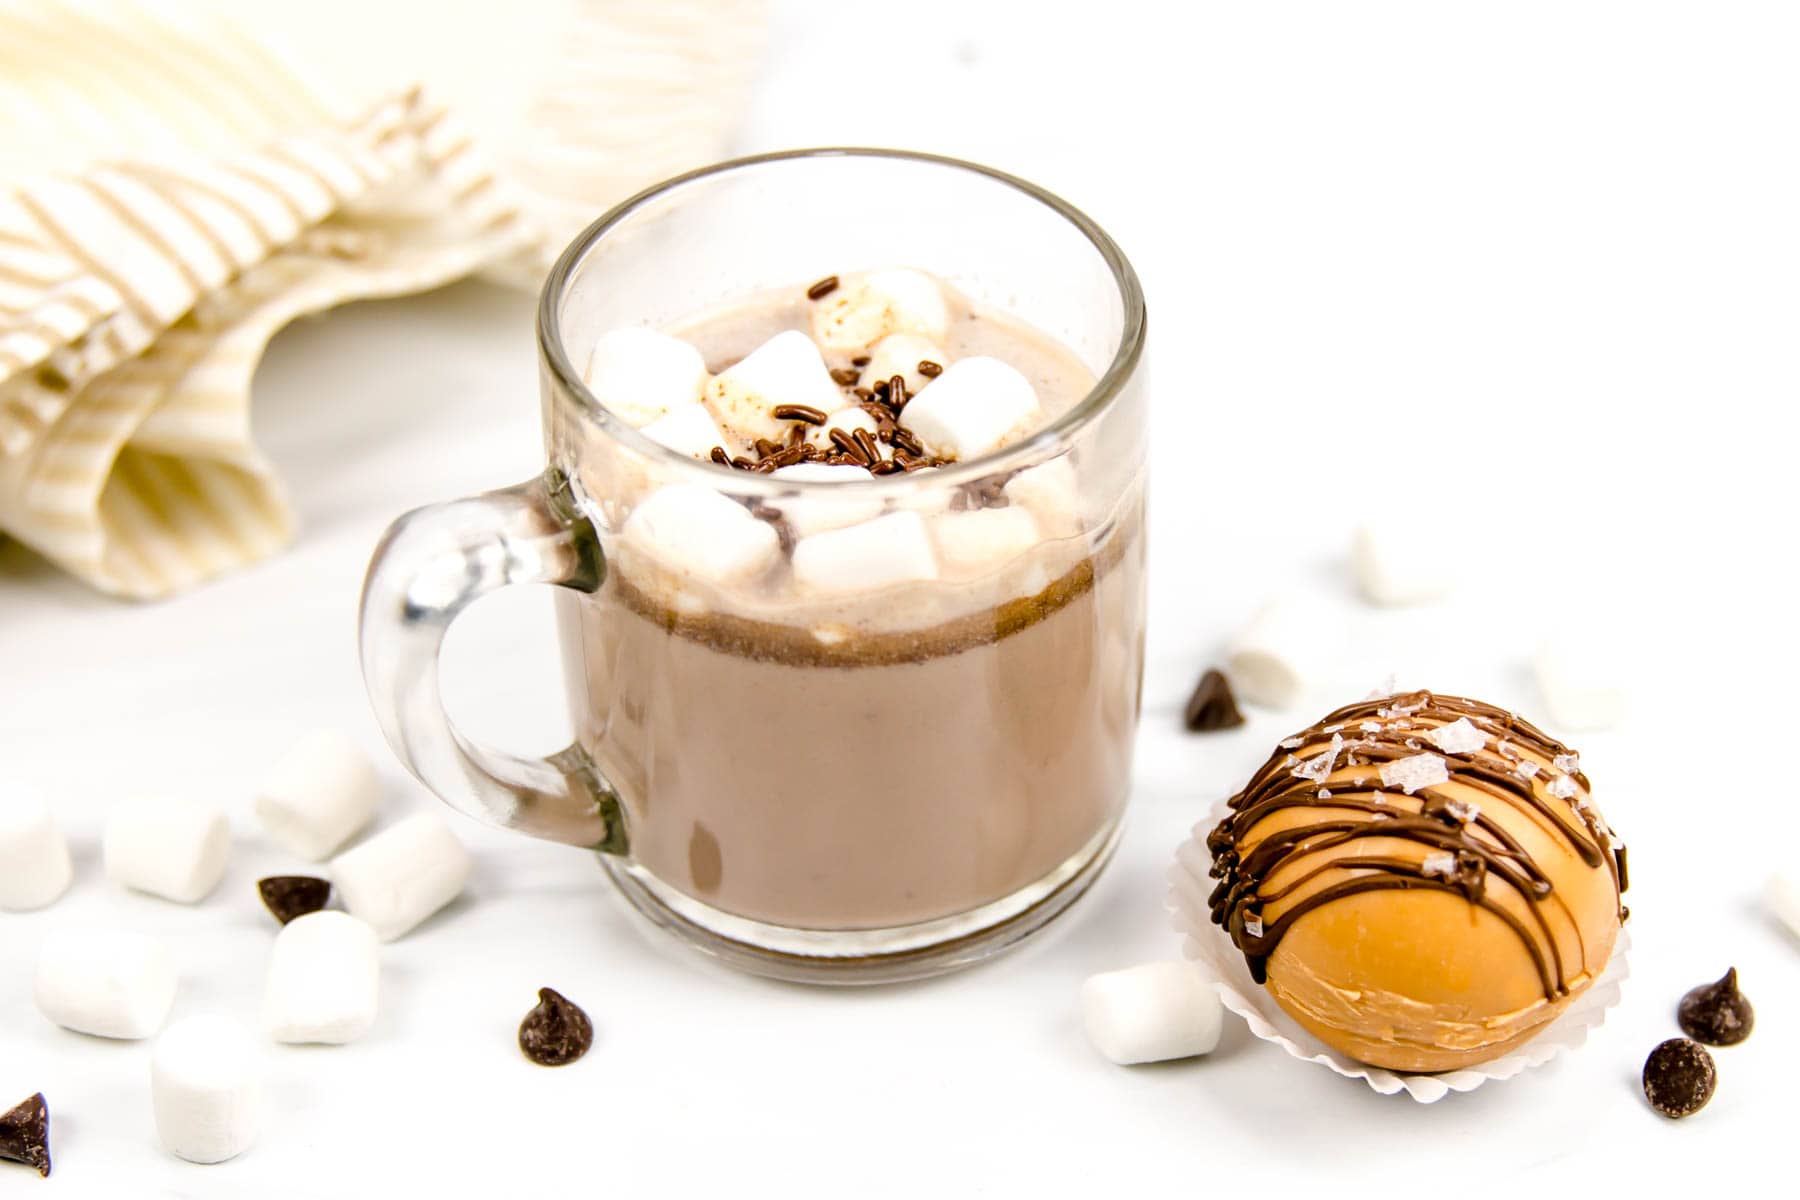 A mug of salted caramel hot chocolate sits next to a salted caramel hot chocolate bomb, marshmallows and chocolate chips.